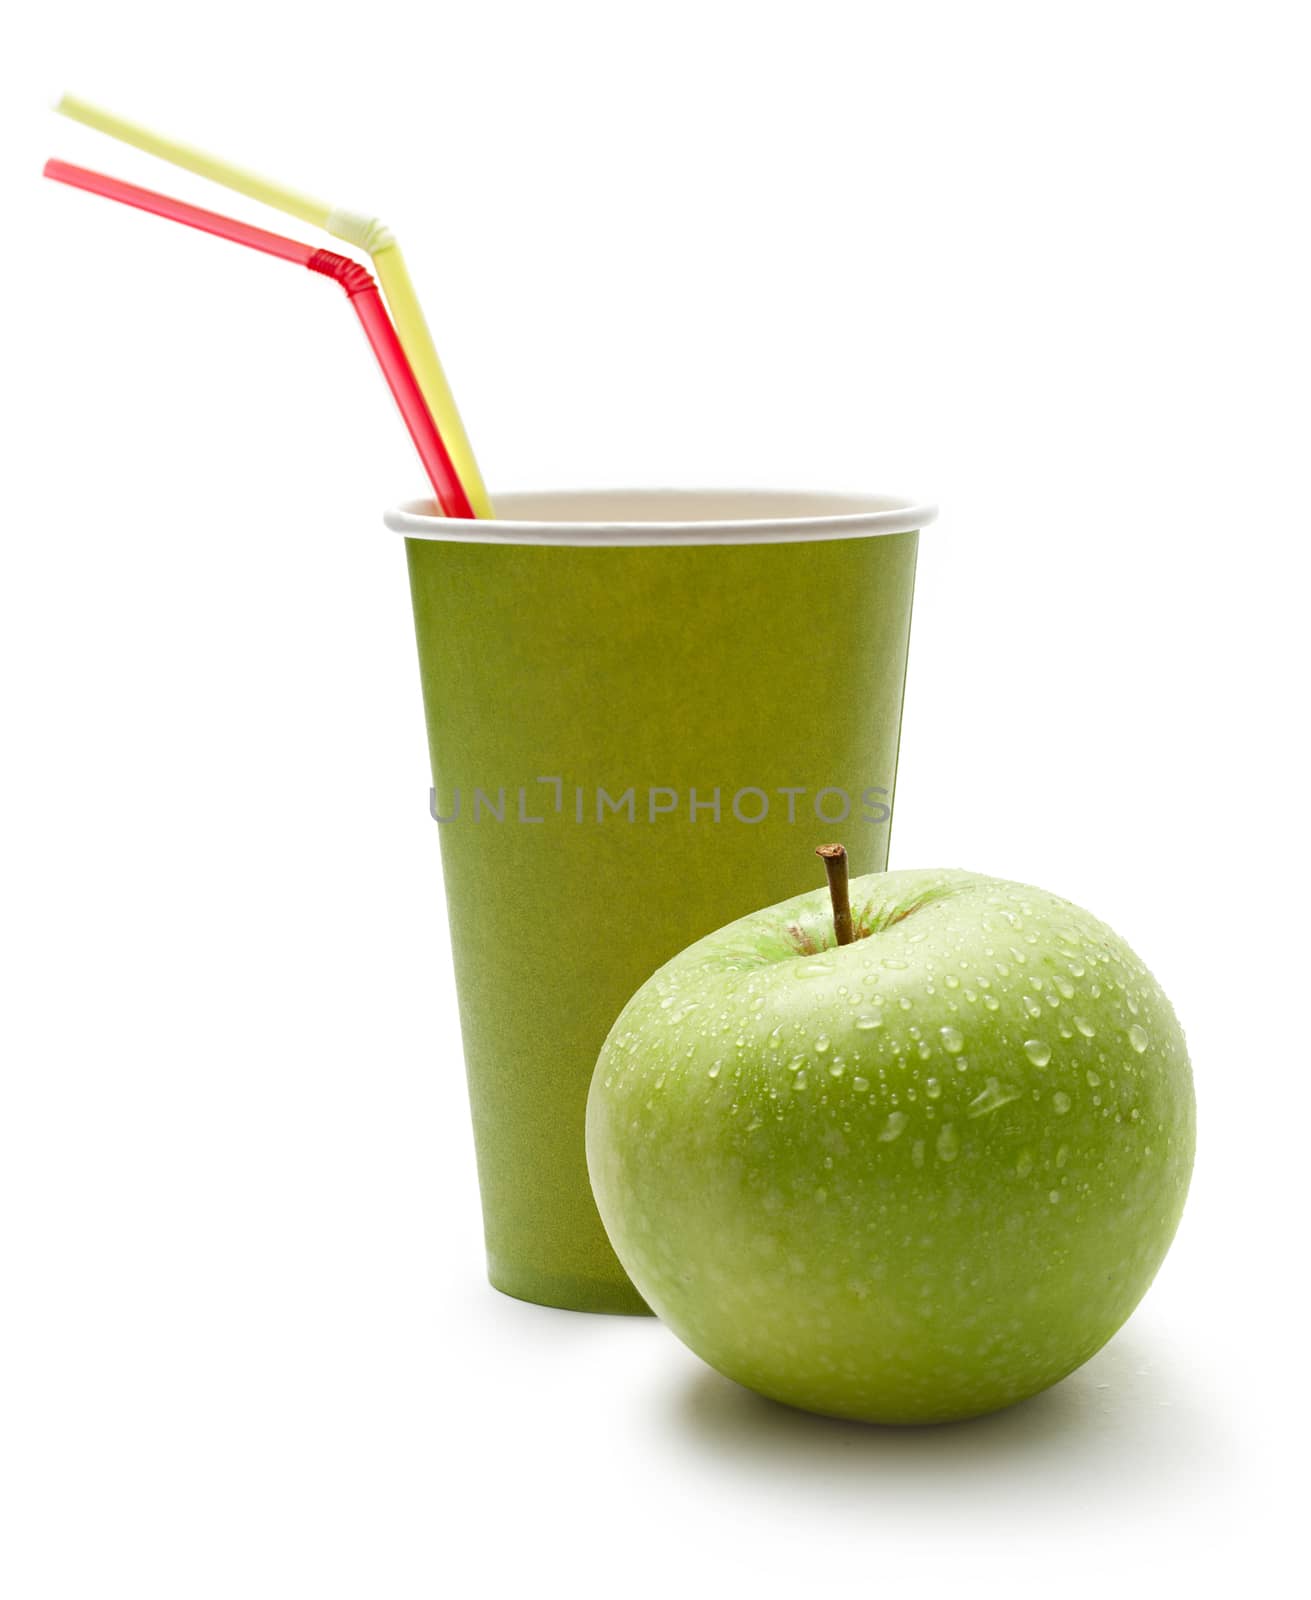 Paper cup with straws and green apple by Garsya